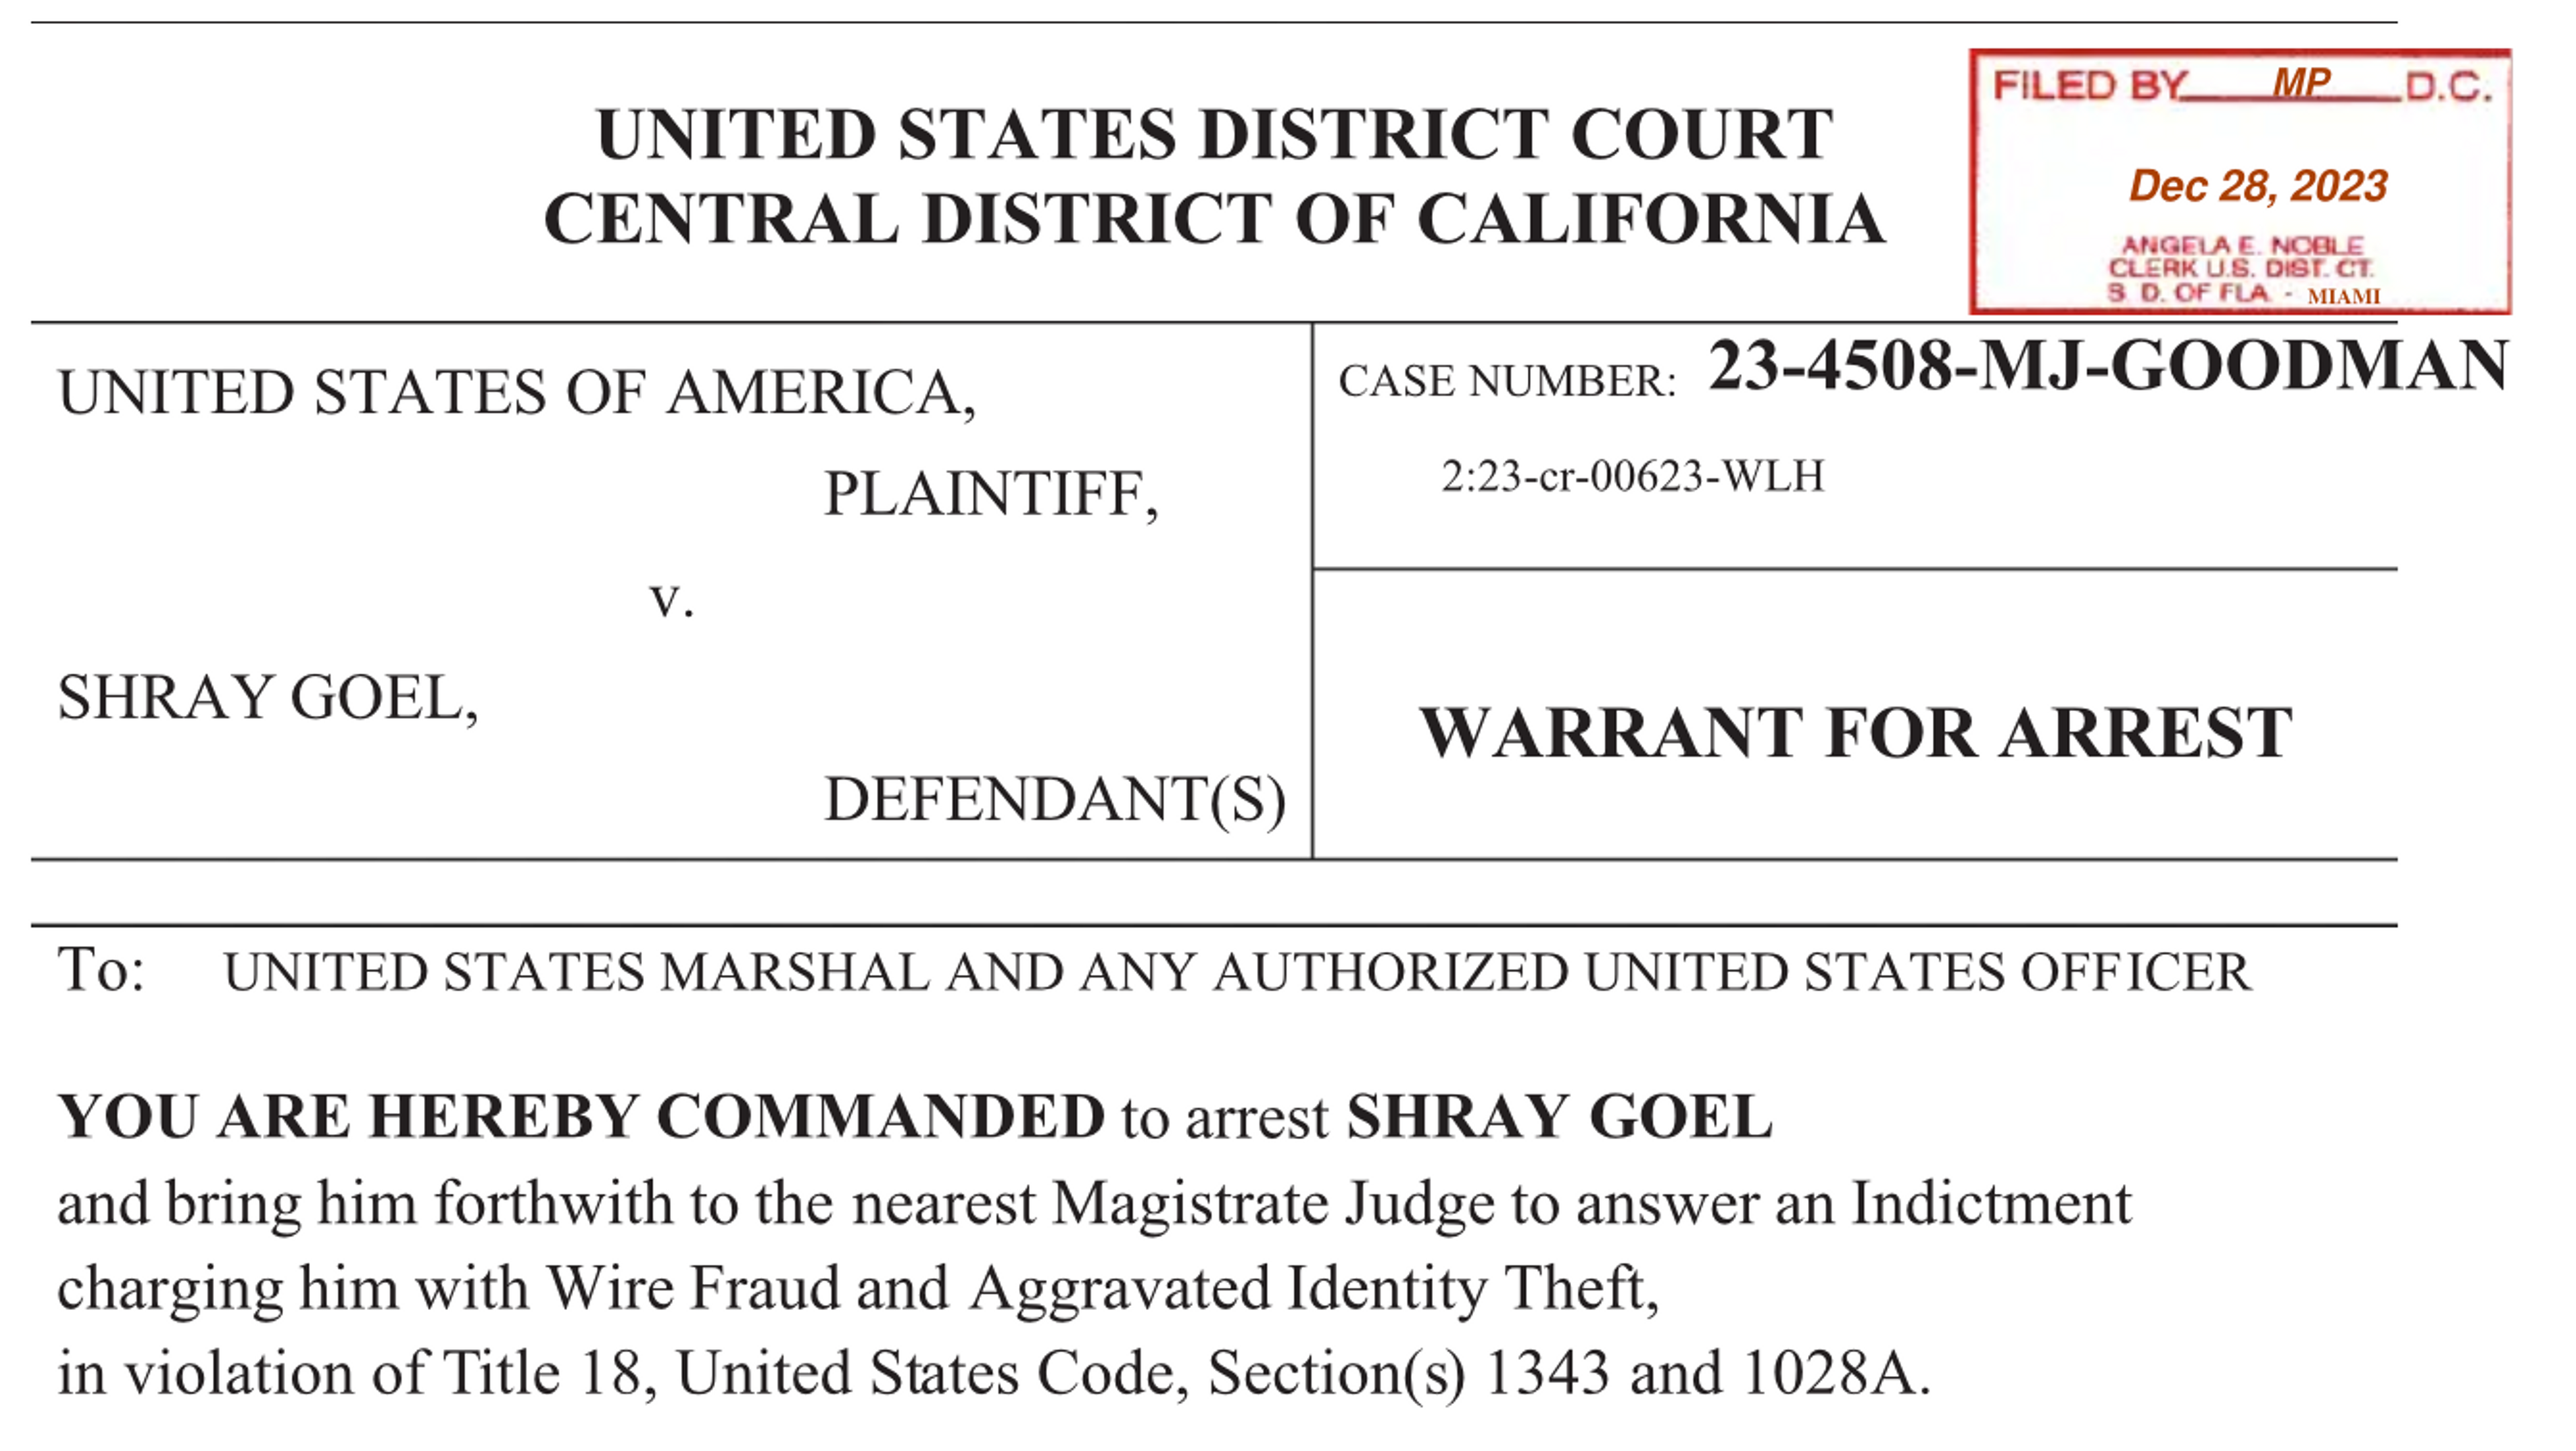 Screenshot of the warrant issued for Shray Goel's arrest in California, charging him with wire fraud and aggravated identity theft. Image uploaded to Scribd by Allie Conti.